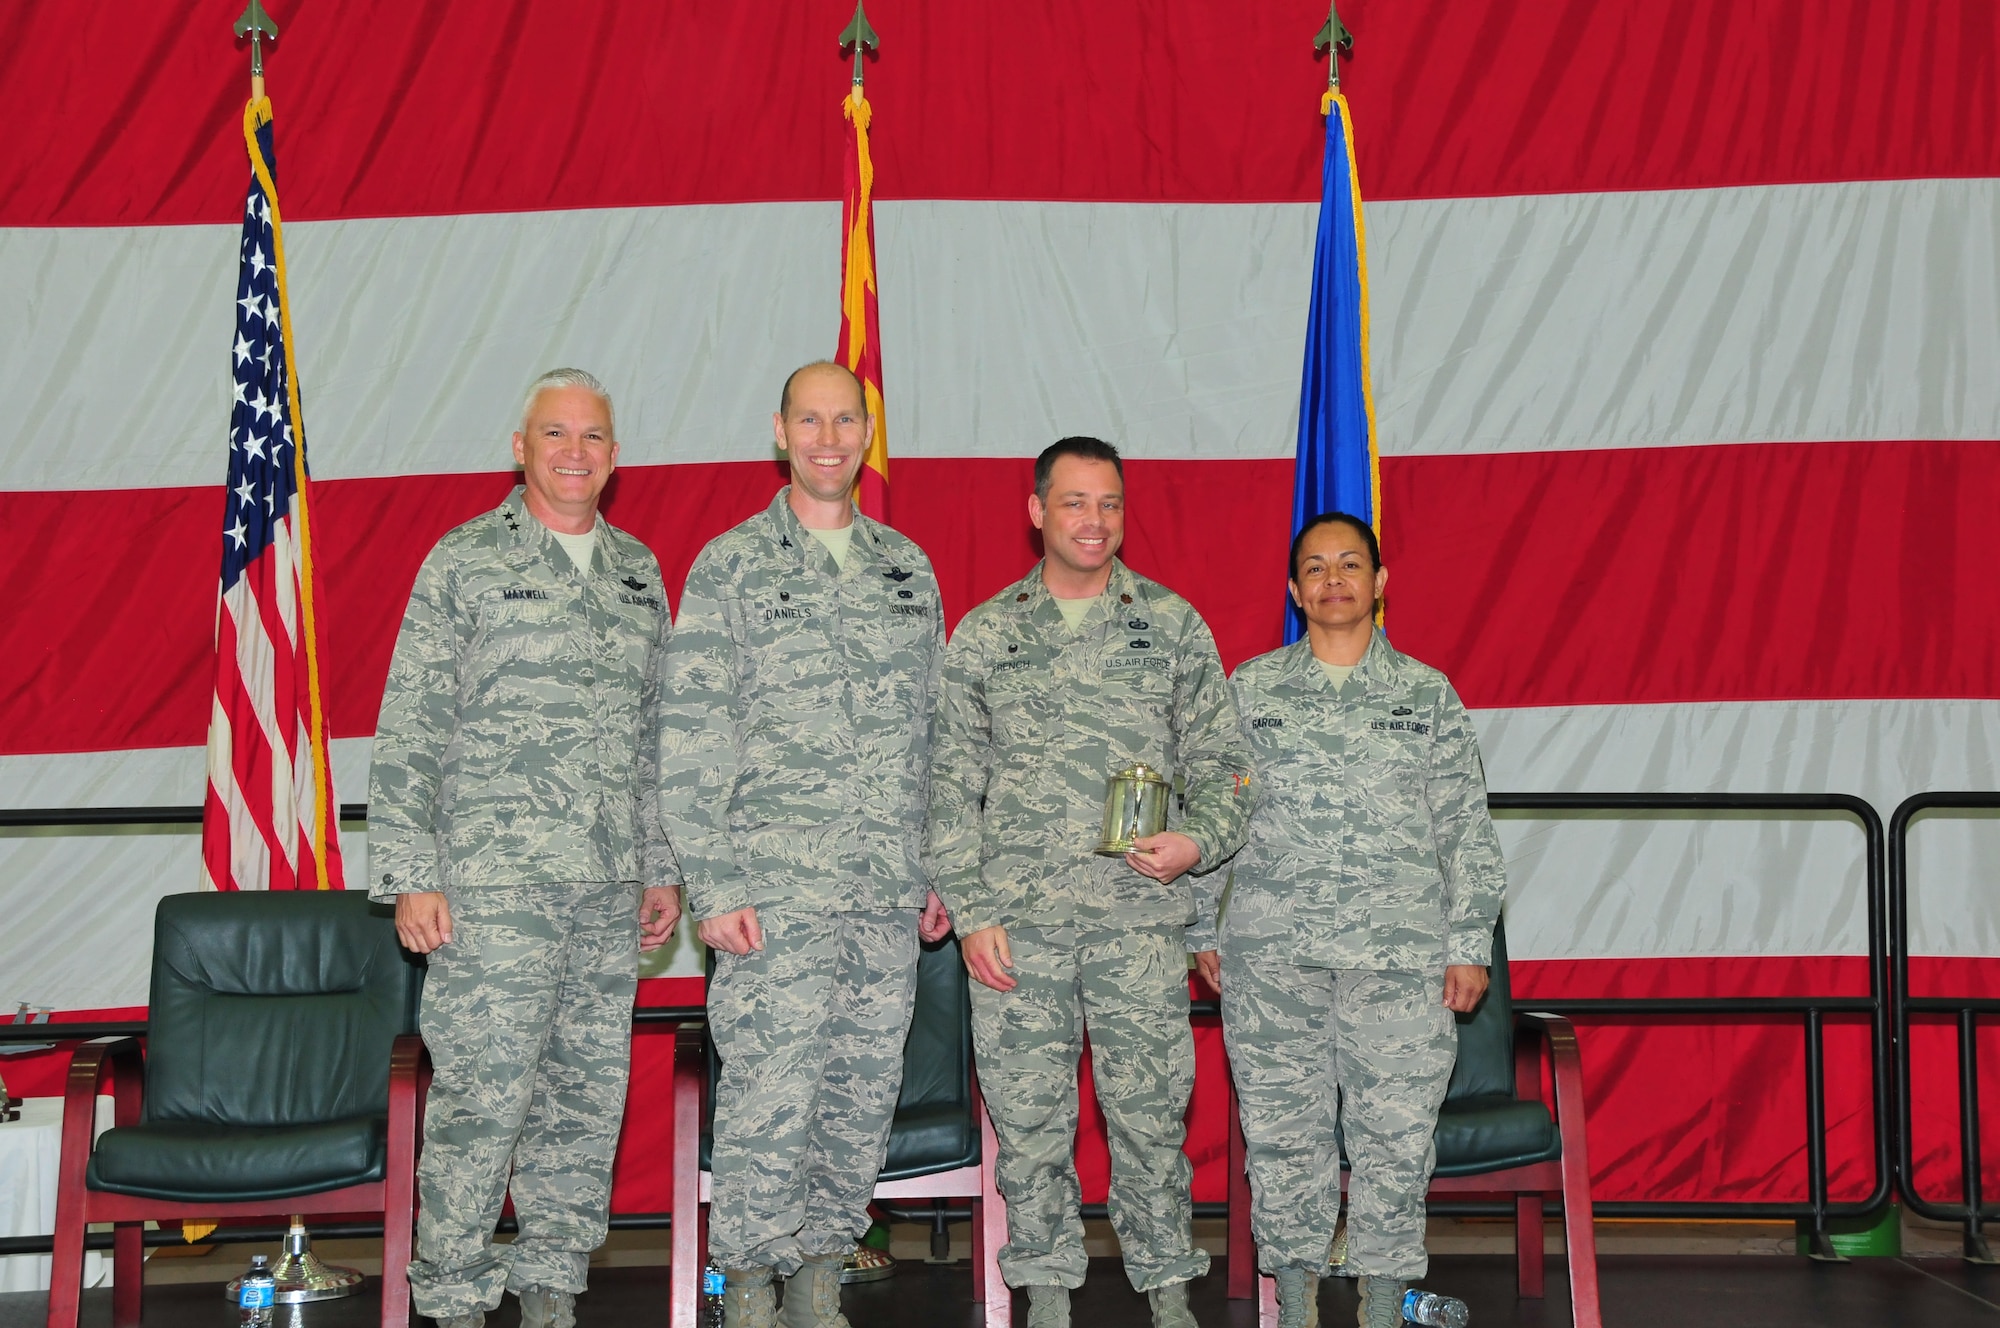 Maj. Joshua French was awarded the Albert Leo Burns award at the 161st Air Refueling Wing annual awards ceremony March 6, 2016, Phoenix Sky Harbor Air National Guard Base. From left to right: Maj. Gen. Edward Maxwell, Arizona Air National Guard commander, Col. Troy Daniels, 161st Air Refueling Wing commander, Maj. Joshua French and Chief Master Sgt. Martha Garcia, 161st Air Refueling Wing command chief. (U. S. Air National Guard photo by Master Sgt. Kelly M. Deitloff/Released)